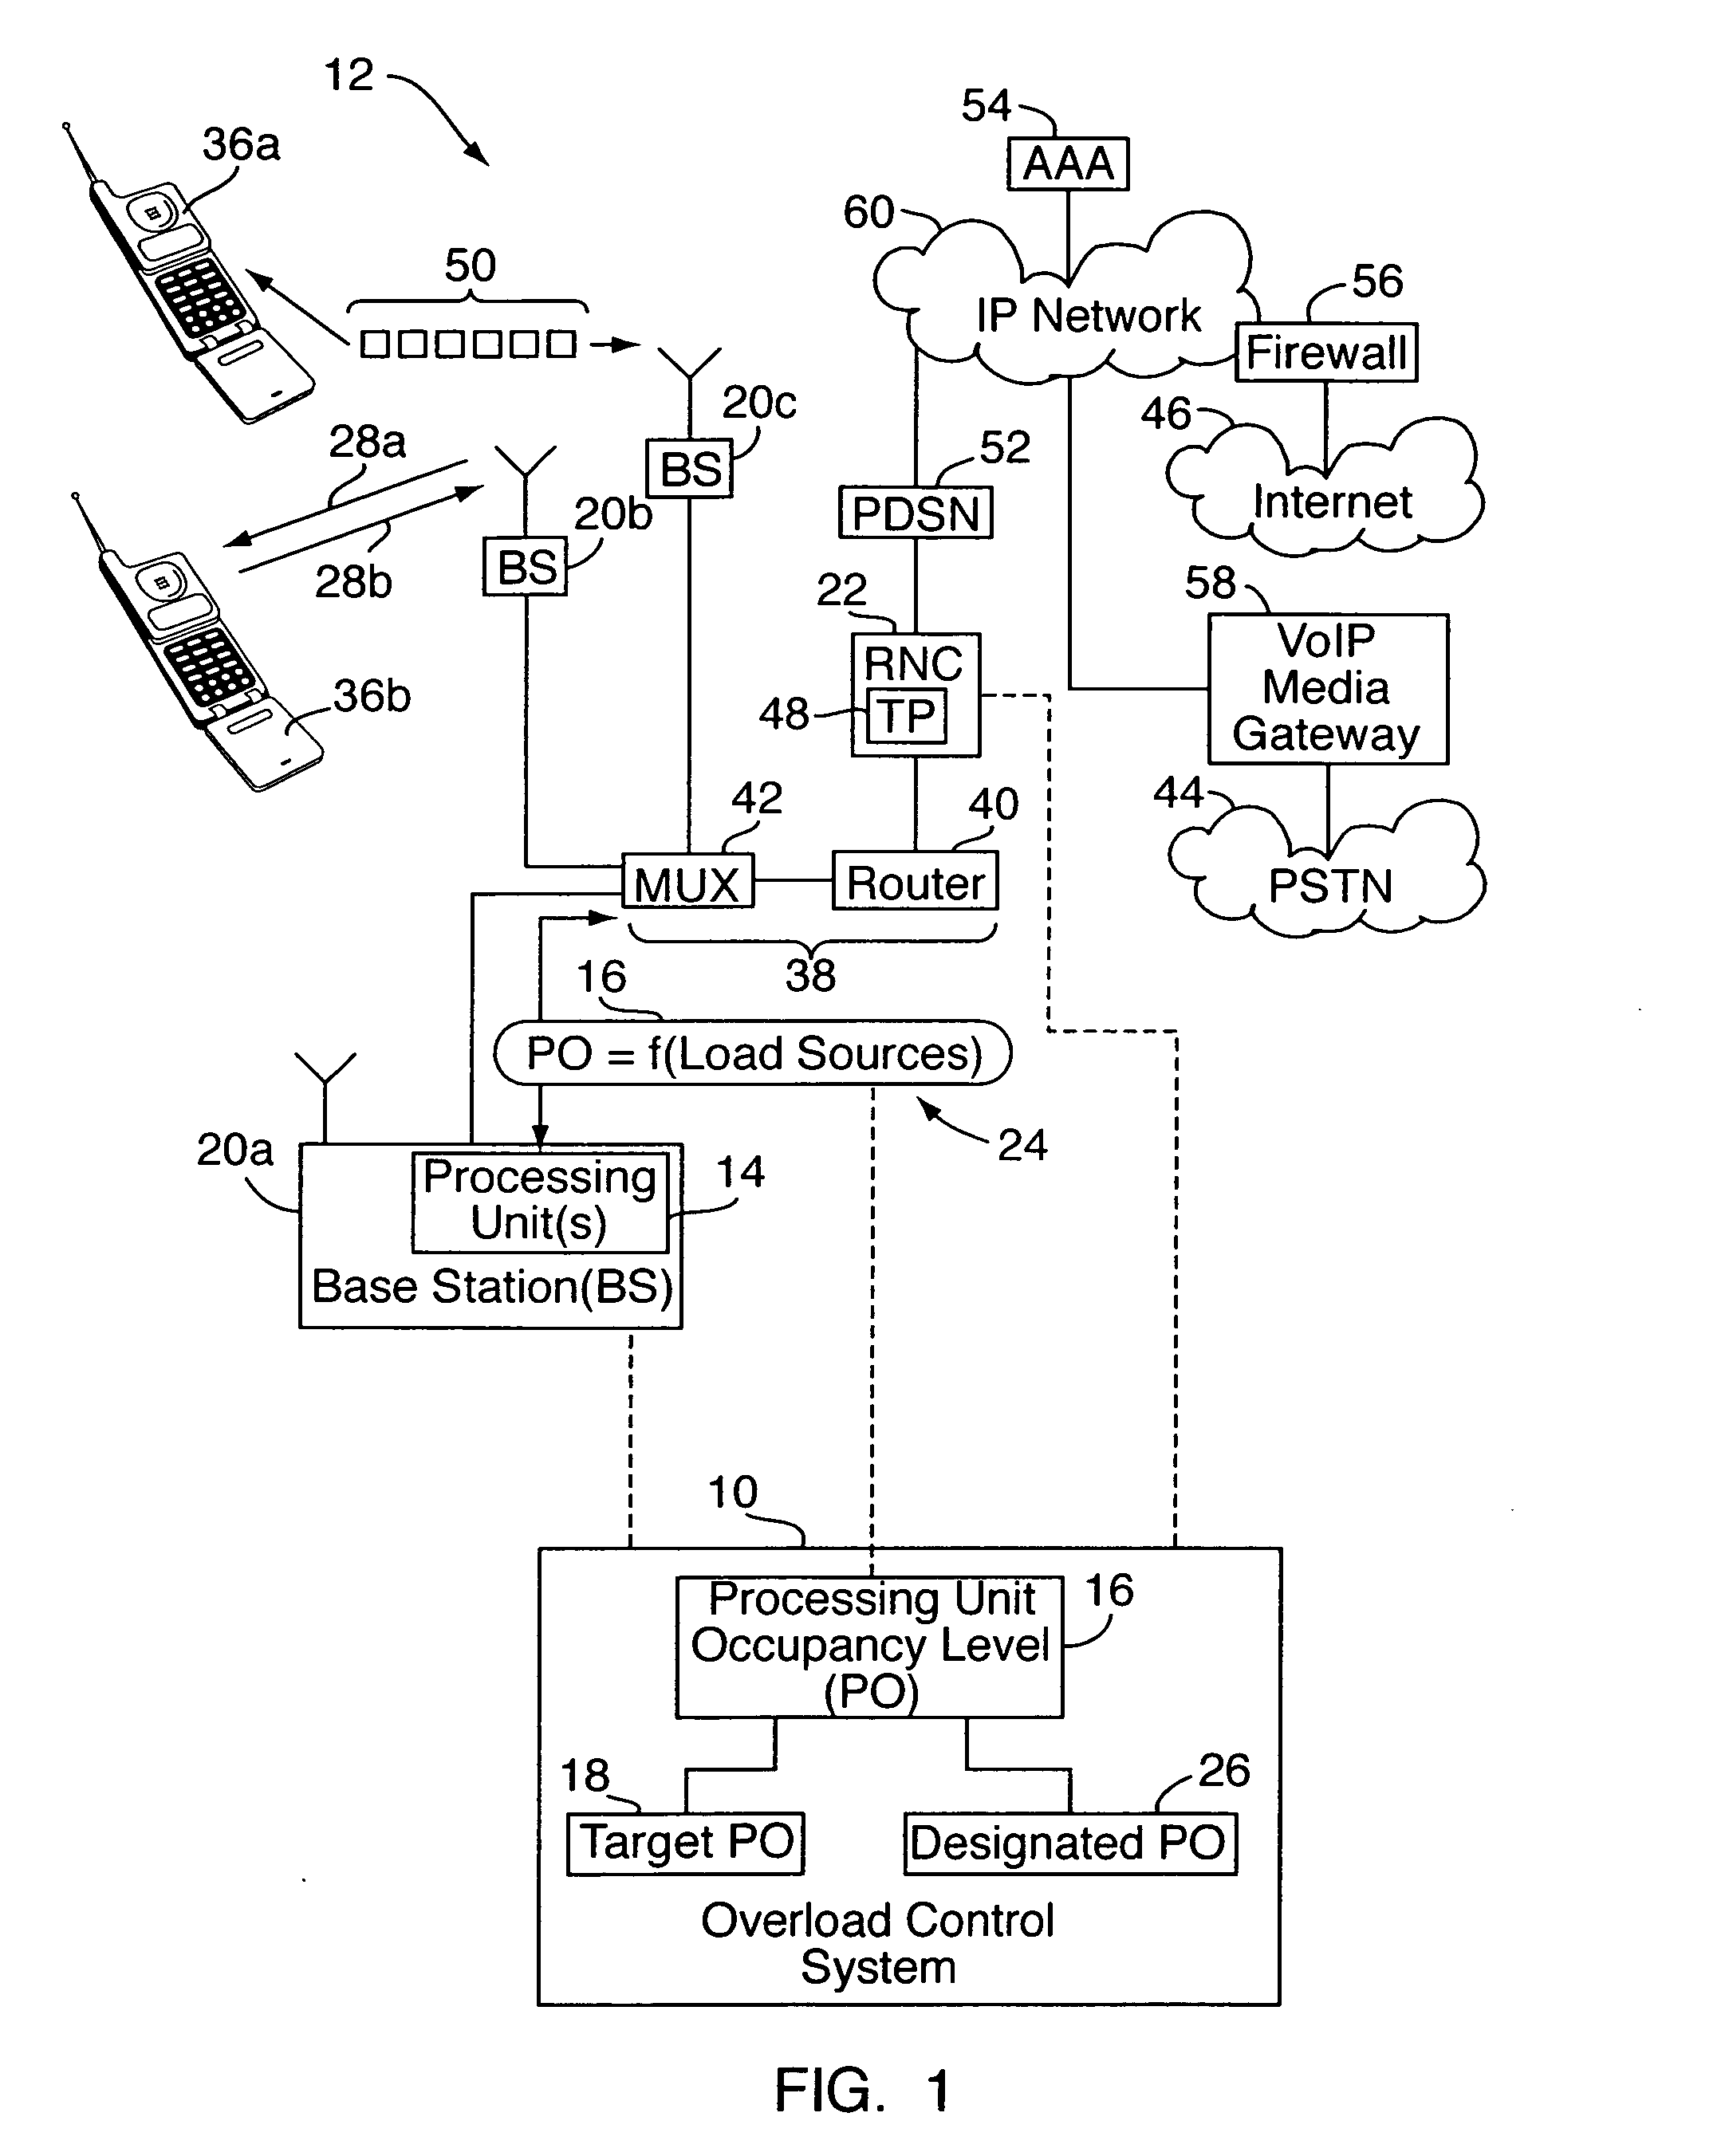 Method and system of overload control in packetized communication networks